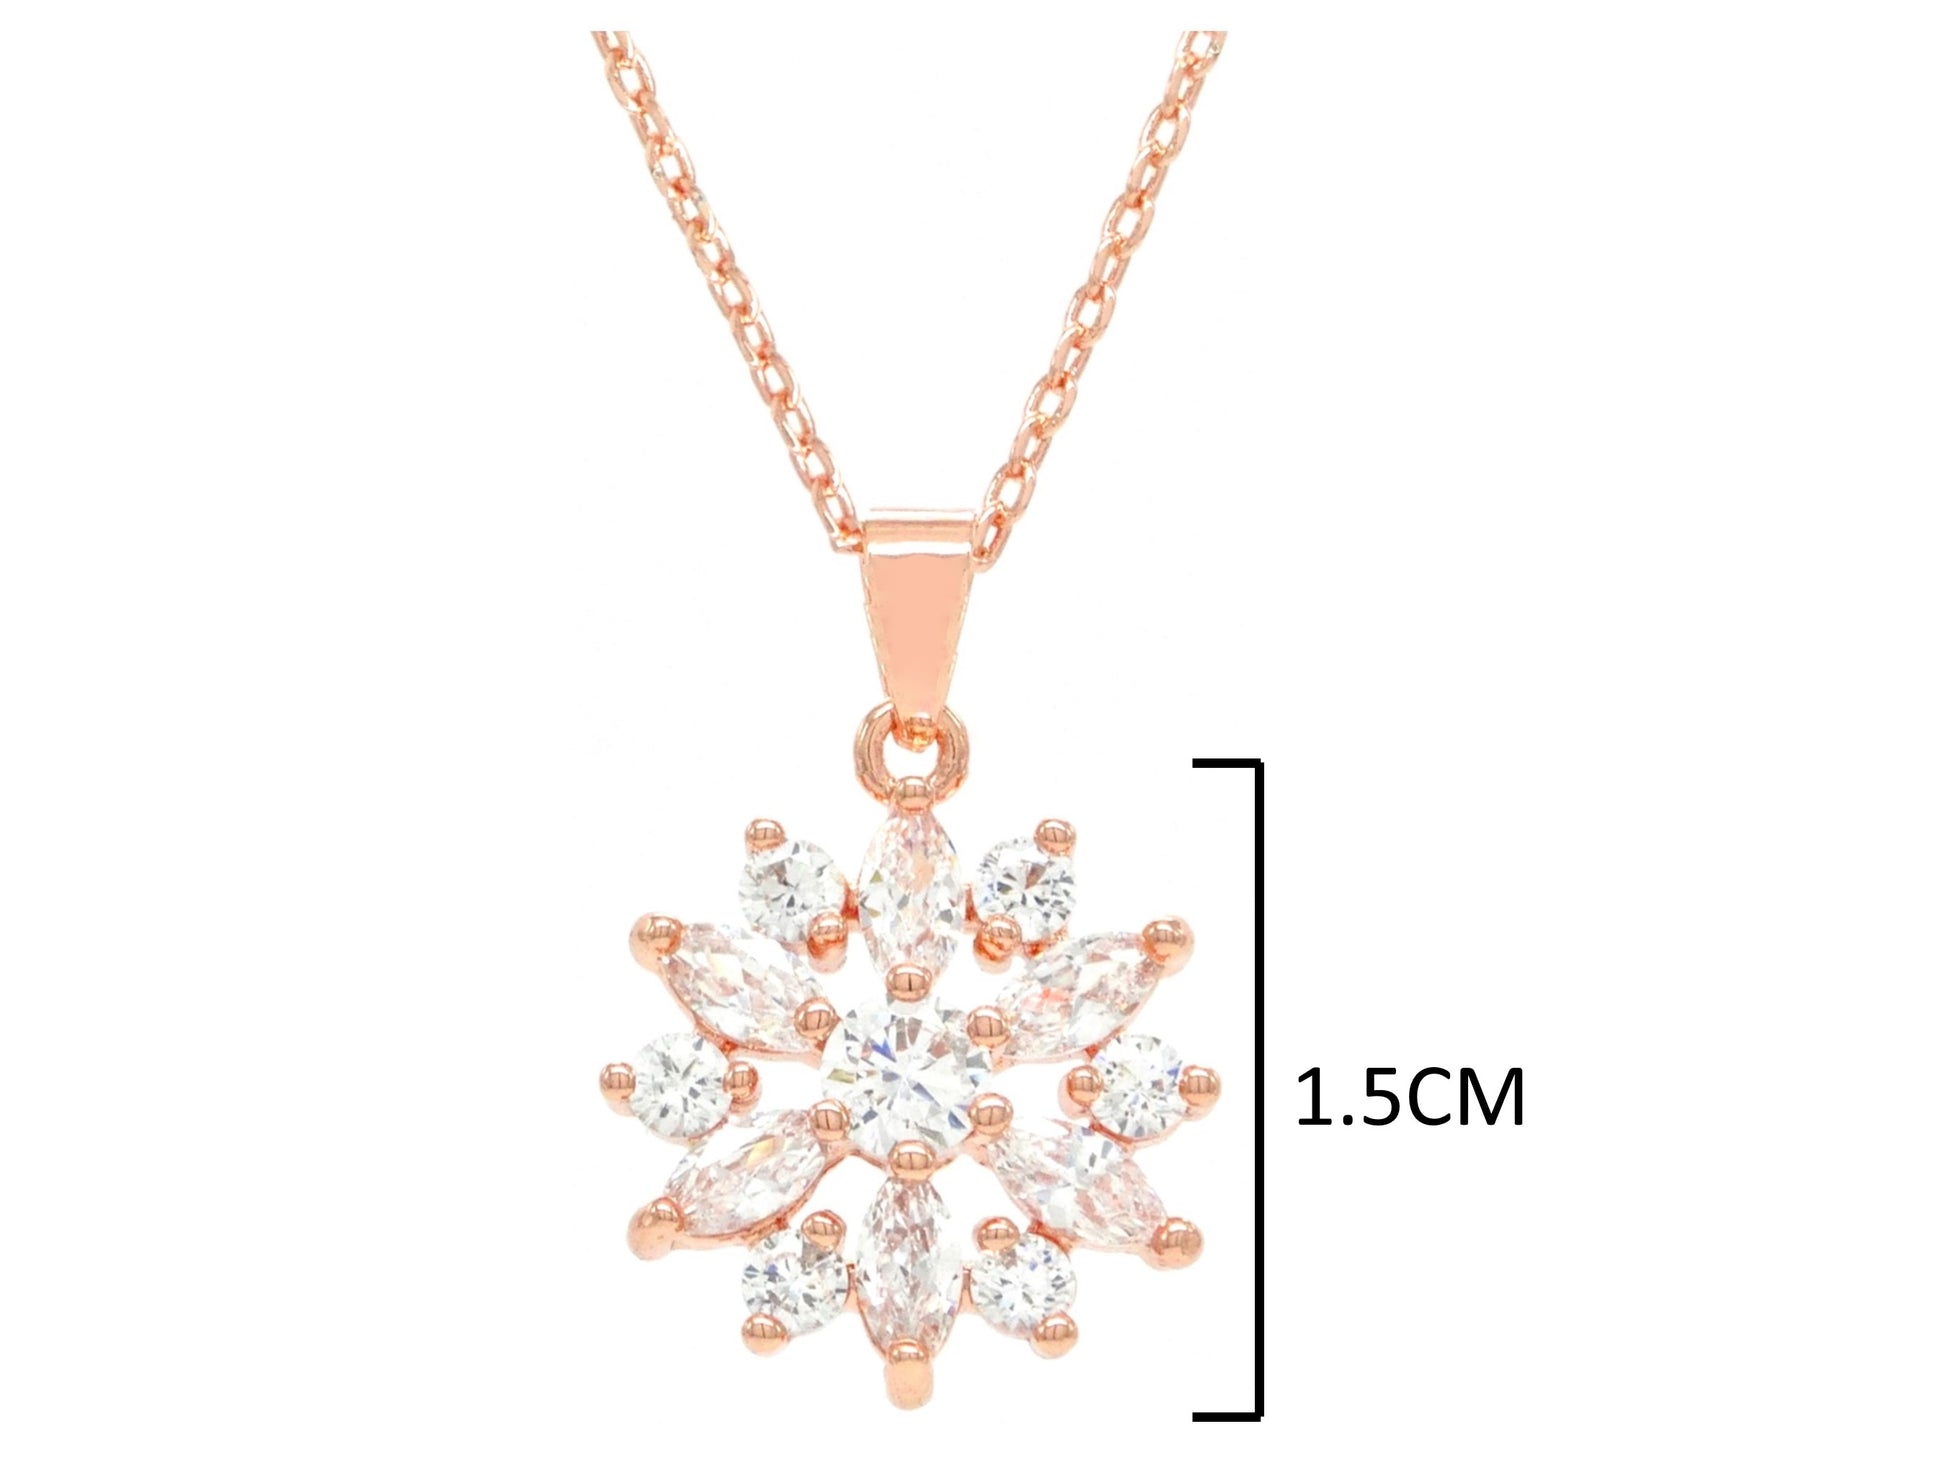 Rose gold sparkly white gems necklace MEASUREMENT